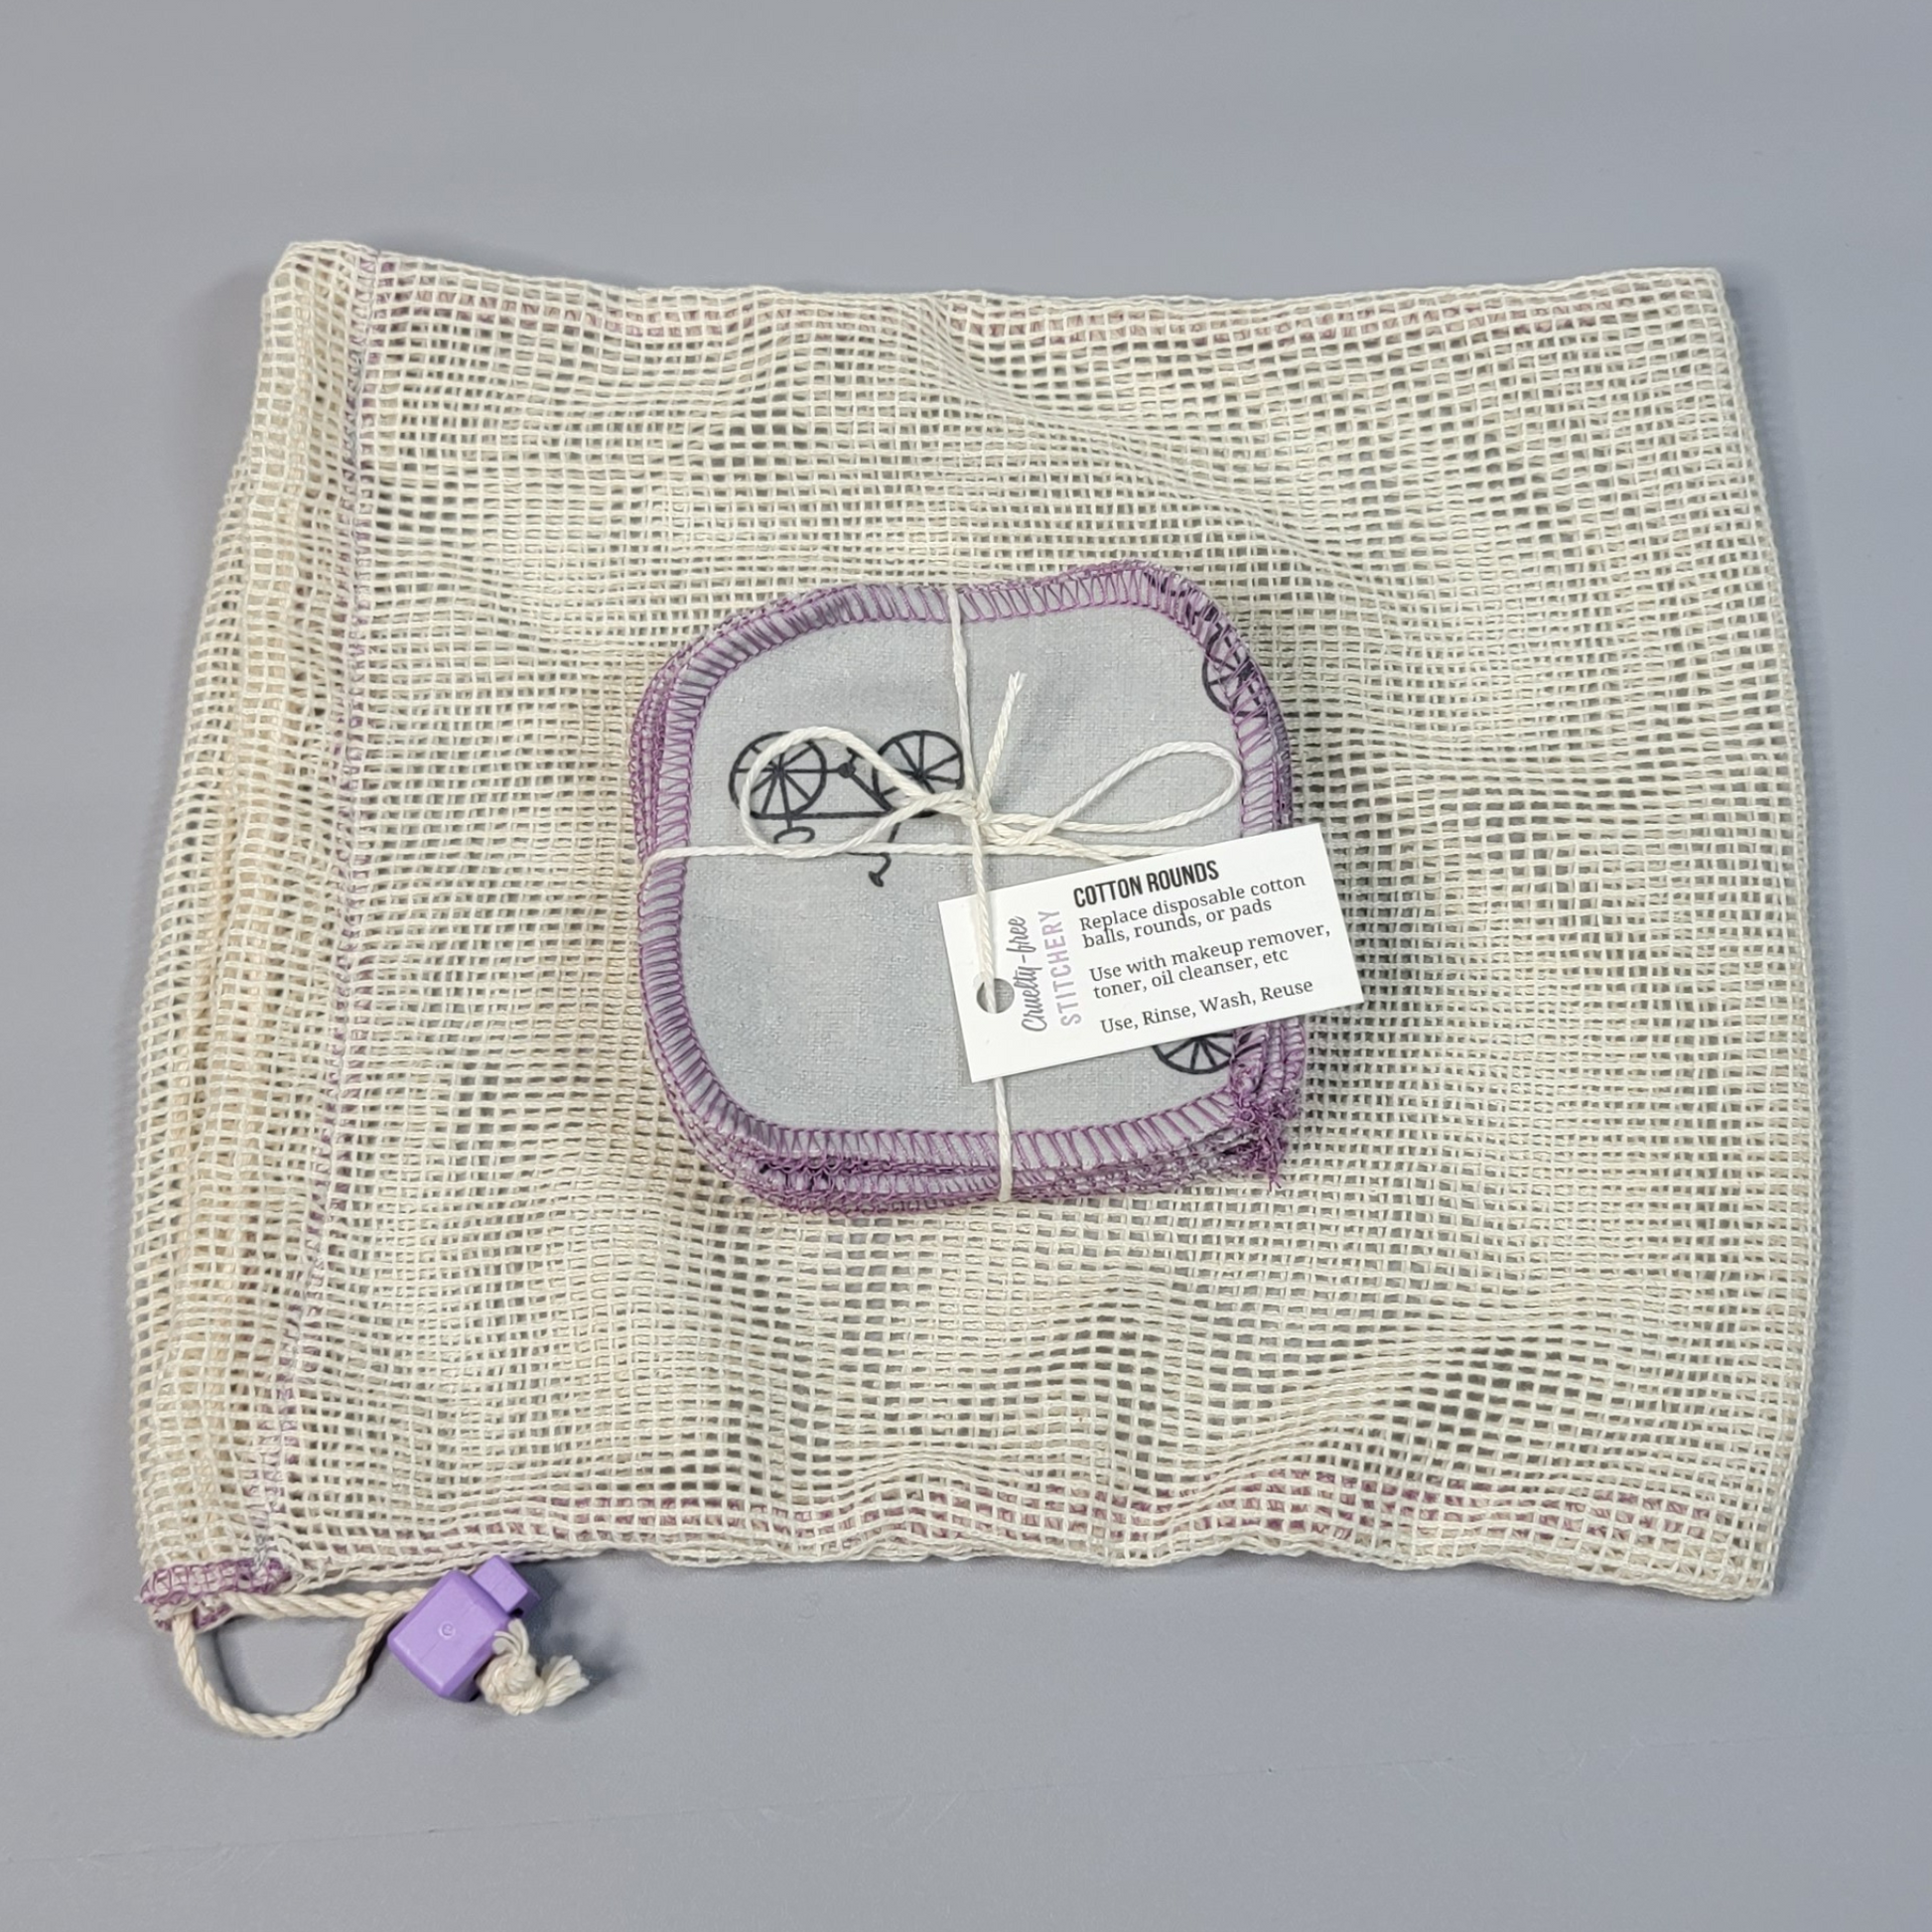 Bundled pack of grey with bicycles cotton rounds on top of a mesh drawstring bag. The bag is a natural off-white colored square mesh, with a light purple cord stop.